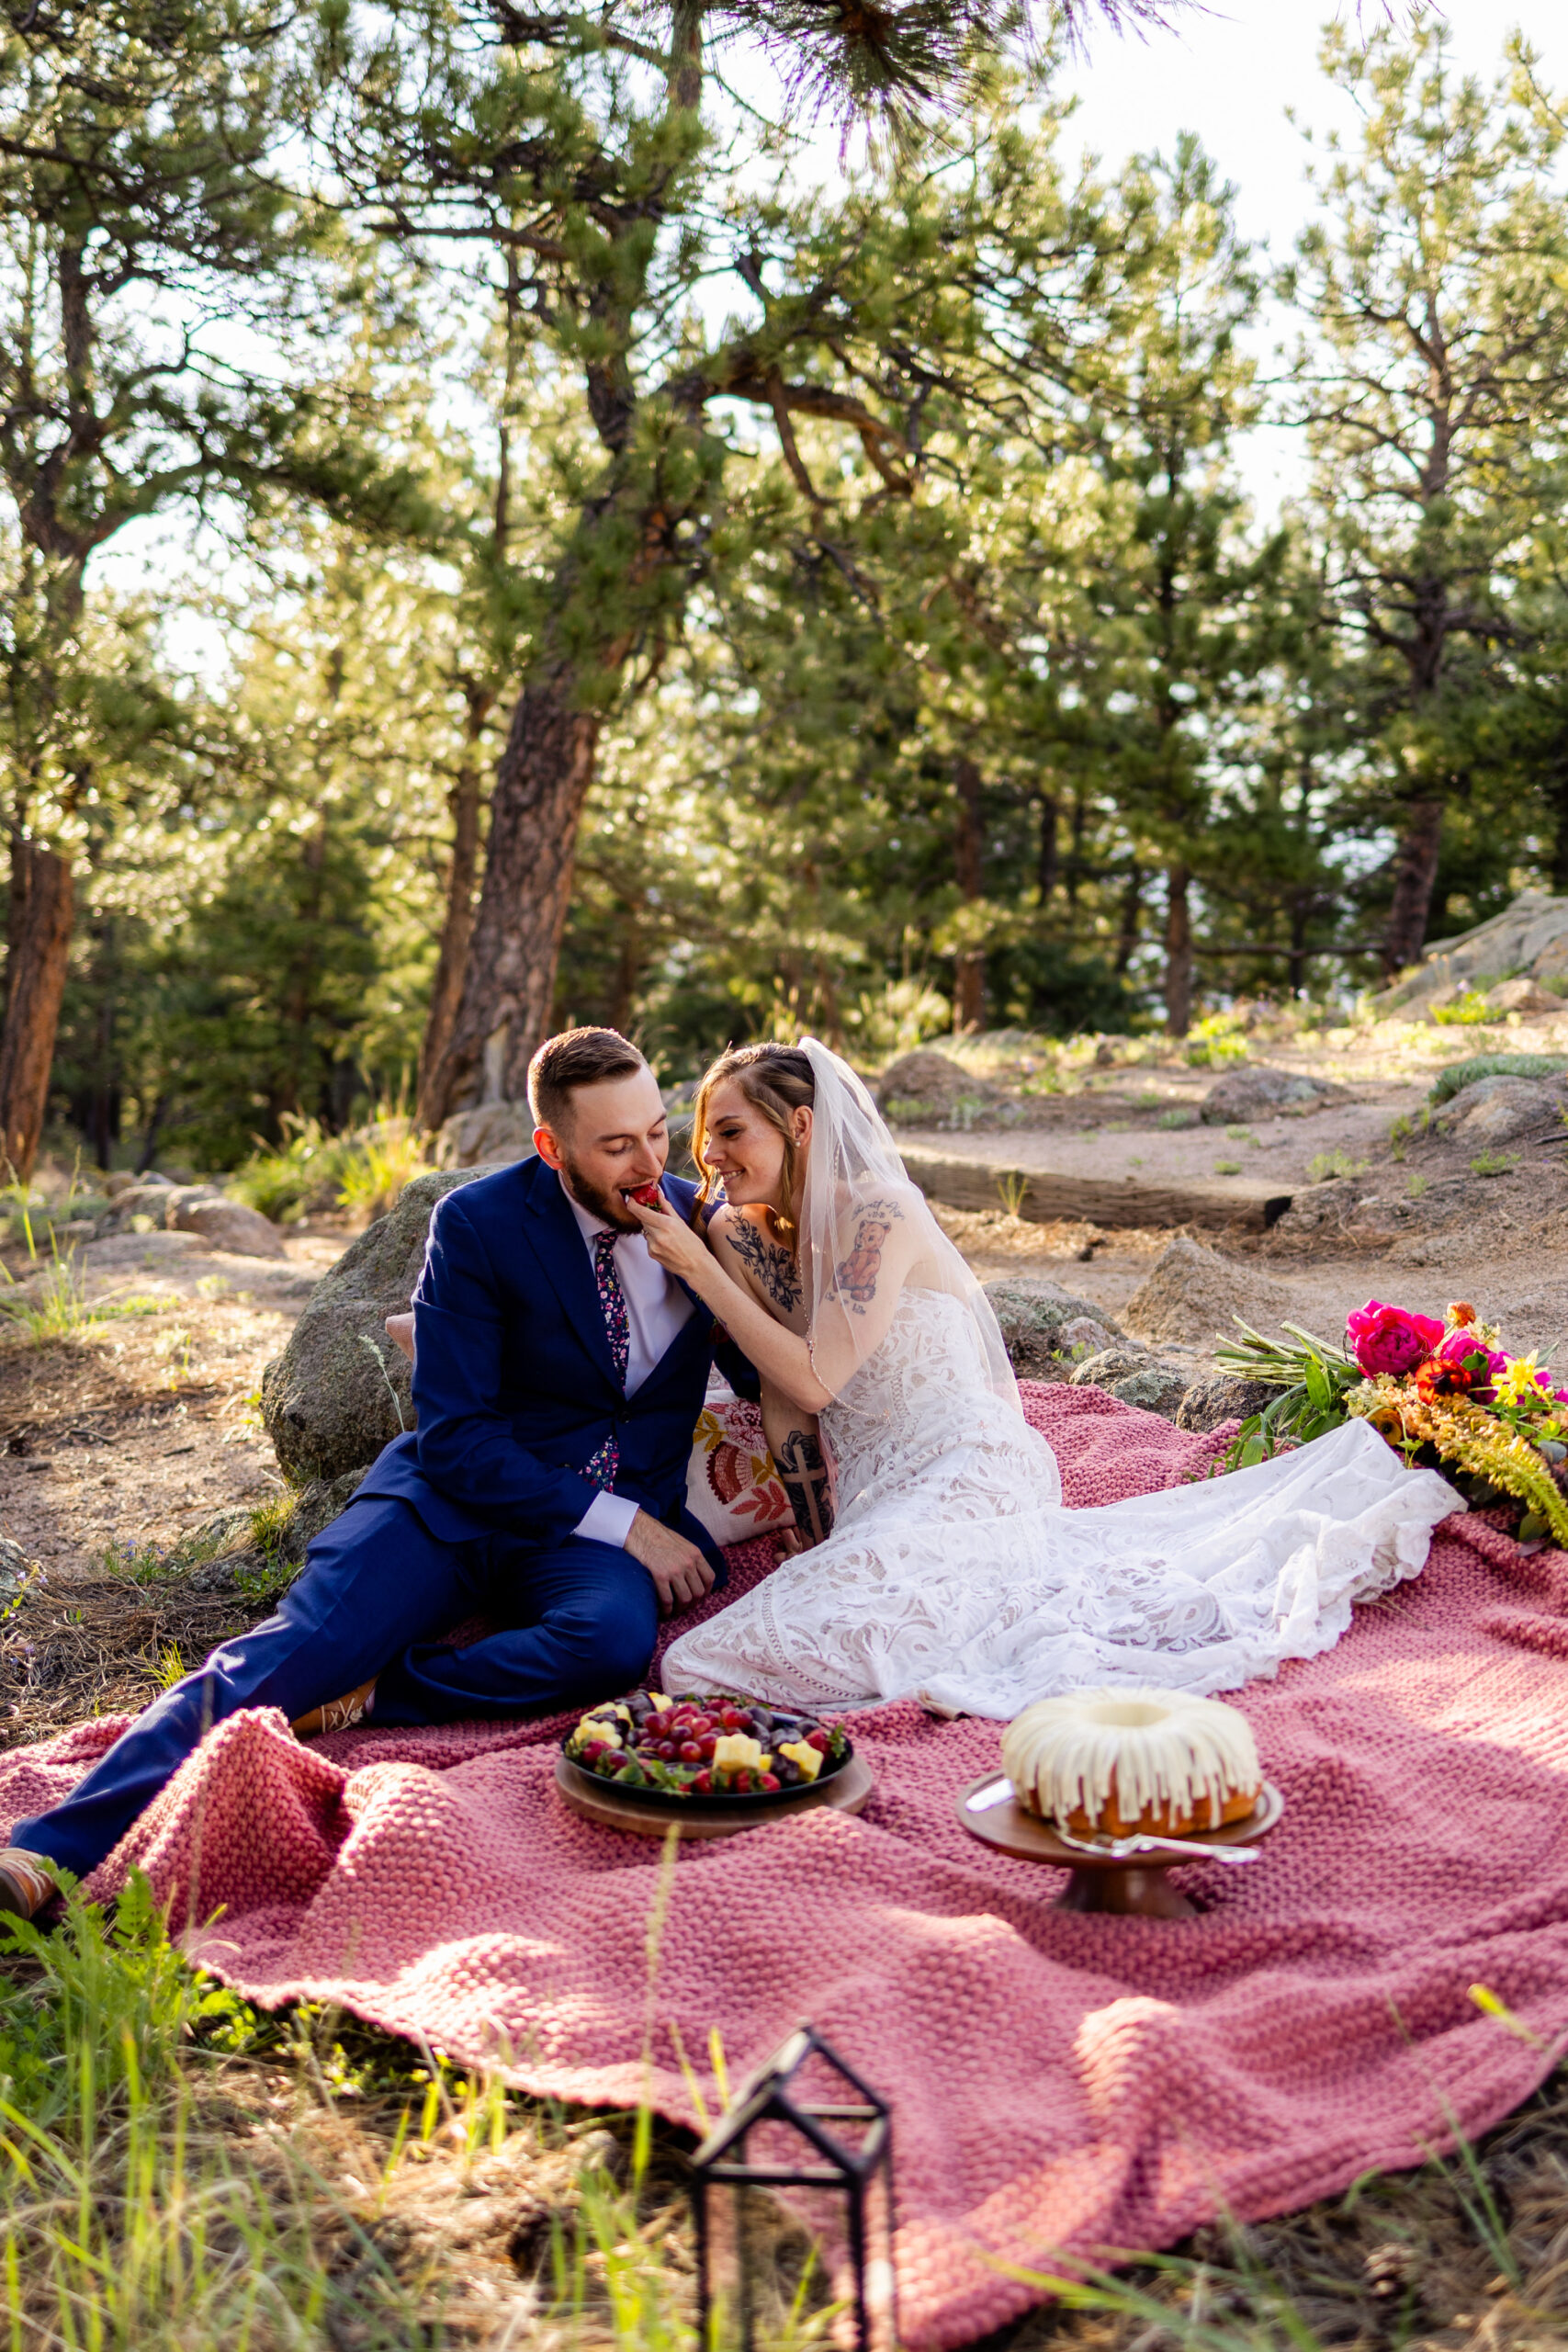 The bride feeding her groom a strawberry during their picnic at Artist Point after their Sunrise Amphitheater elopement ceremony. 